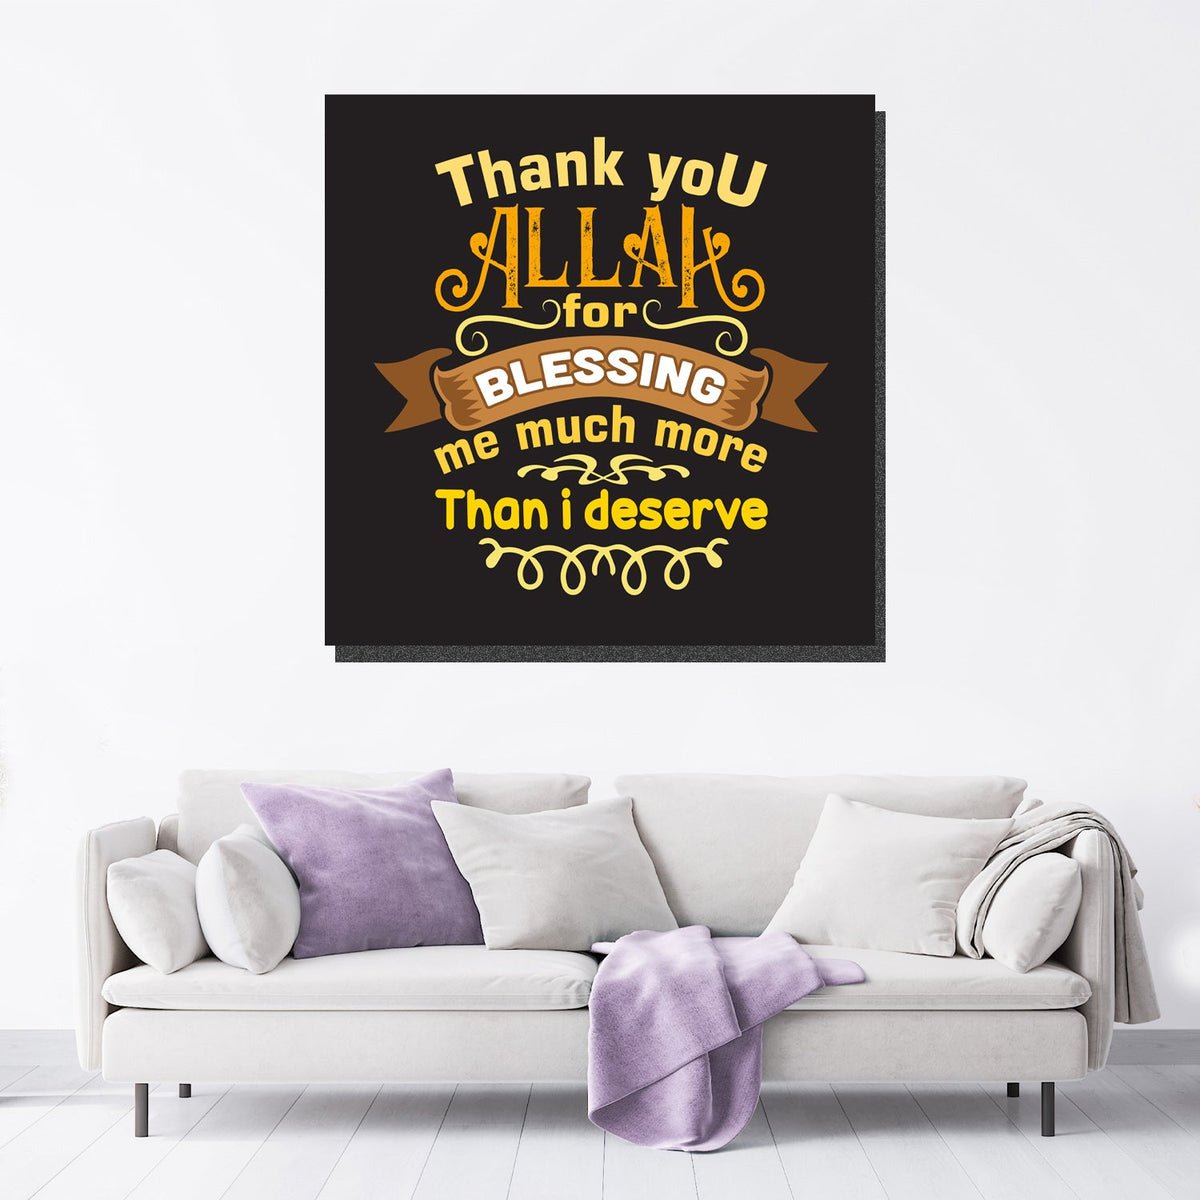 https://cdn.shopify.com/s/files/1/0387/9986/8044/products/ThankYouAllahCanvasArtprintStretched-3.jpg